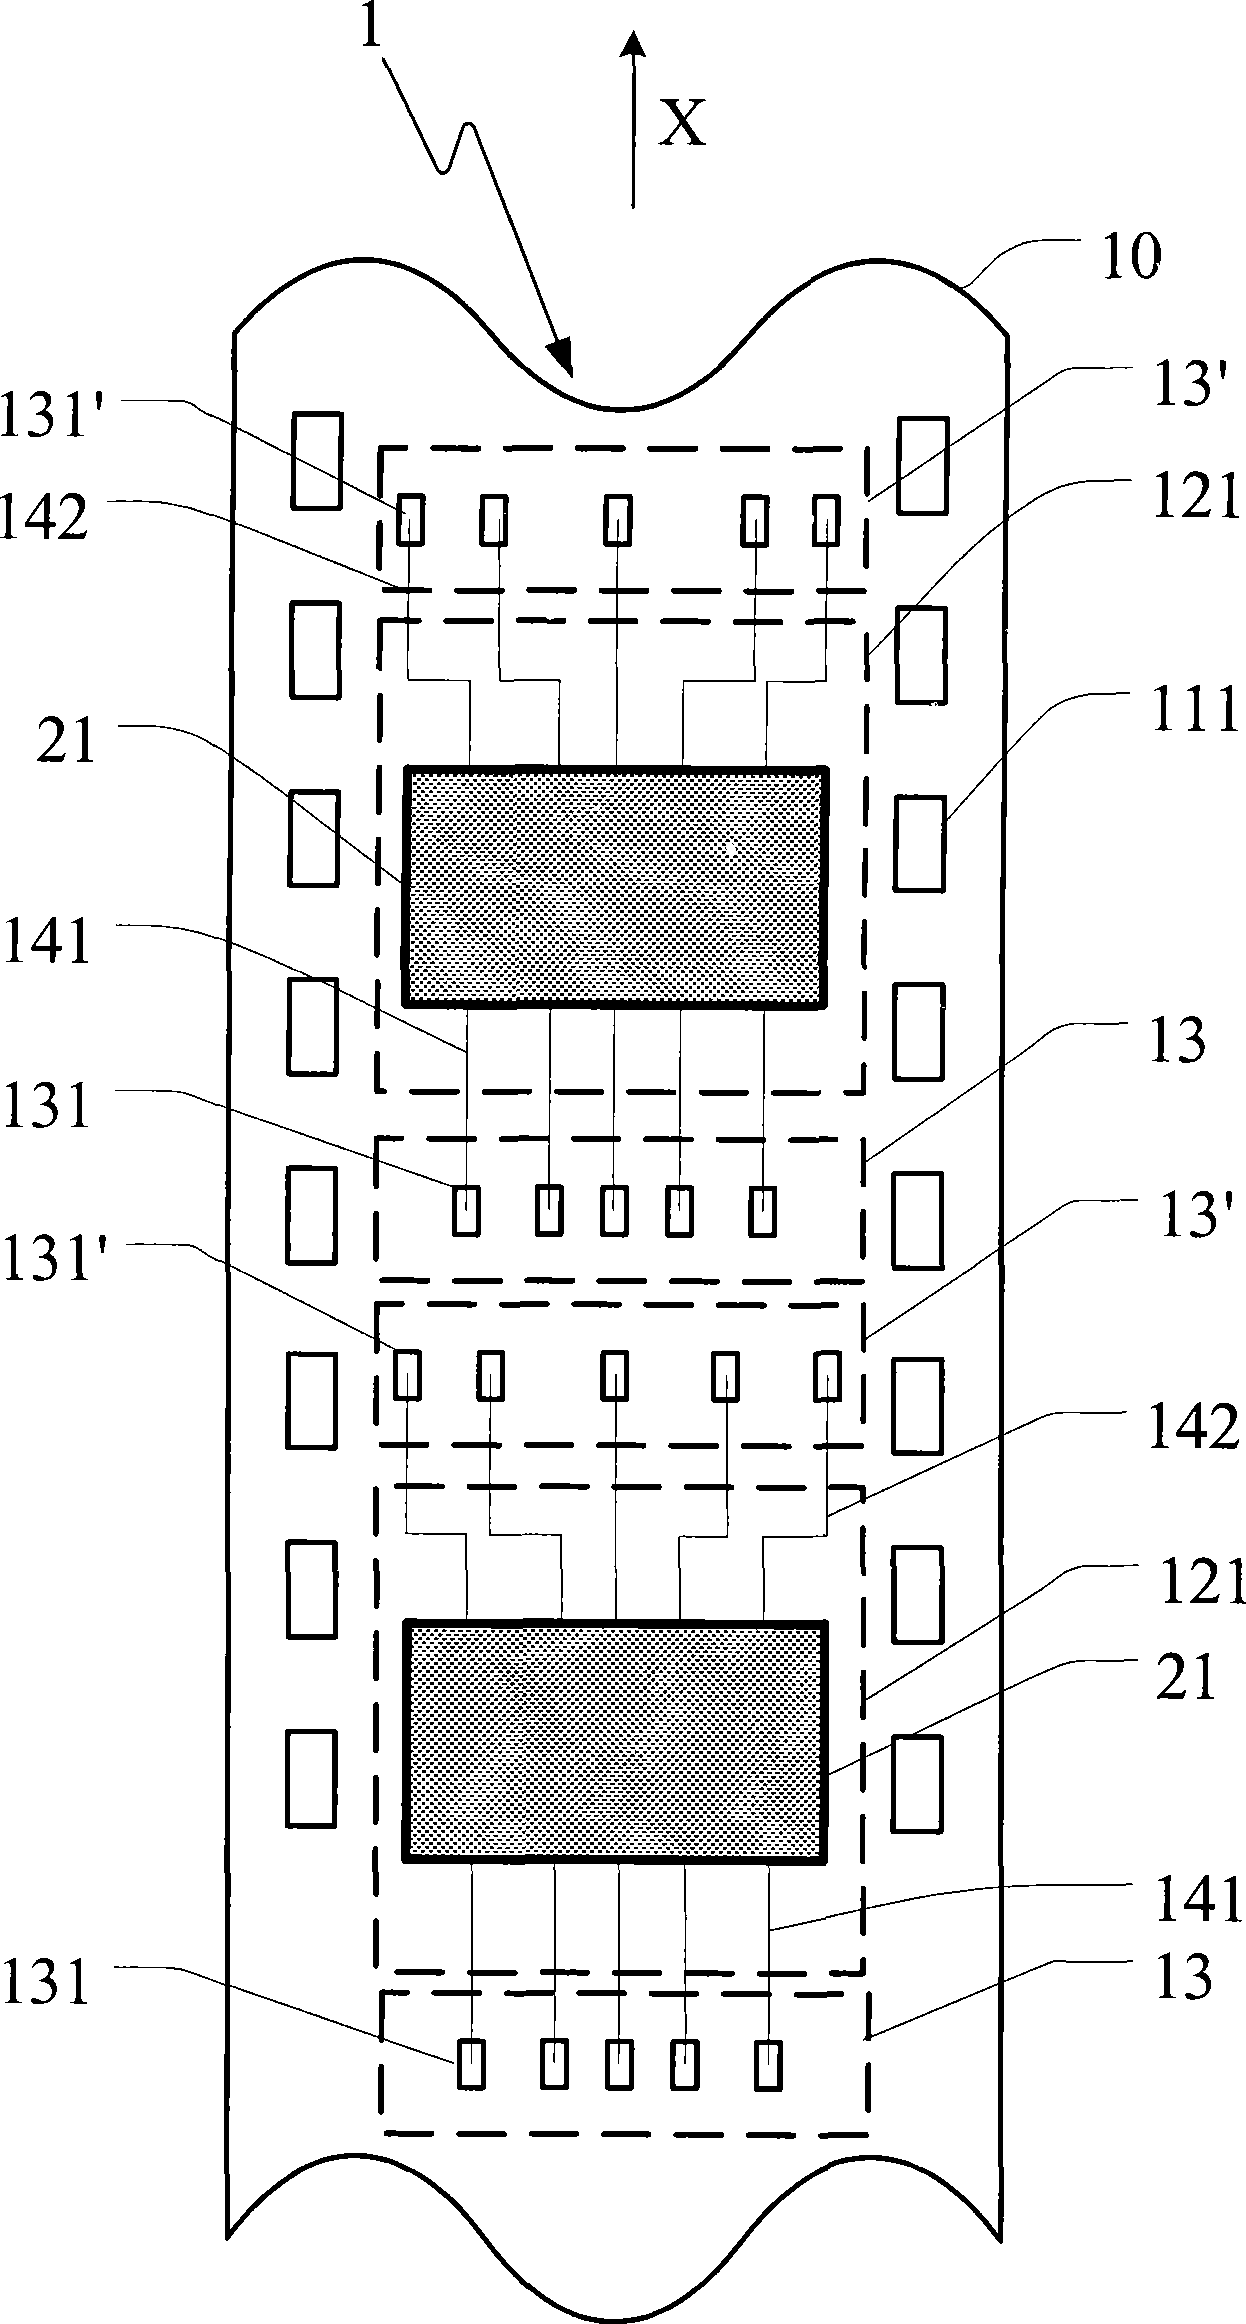 Load bearing belt for packing chip and chip packaging structure